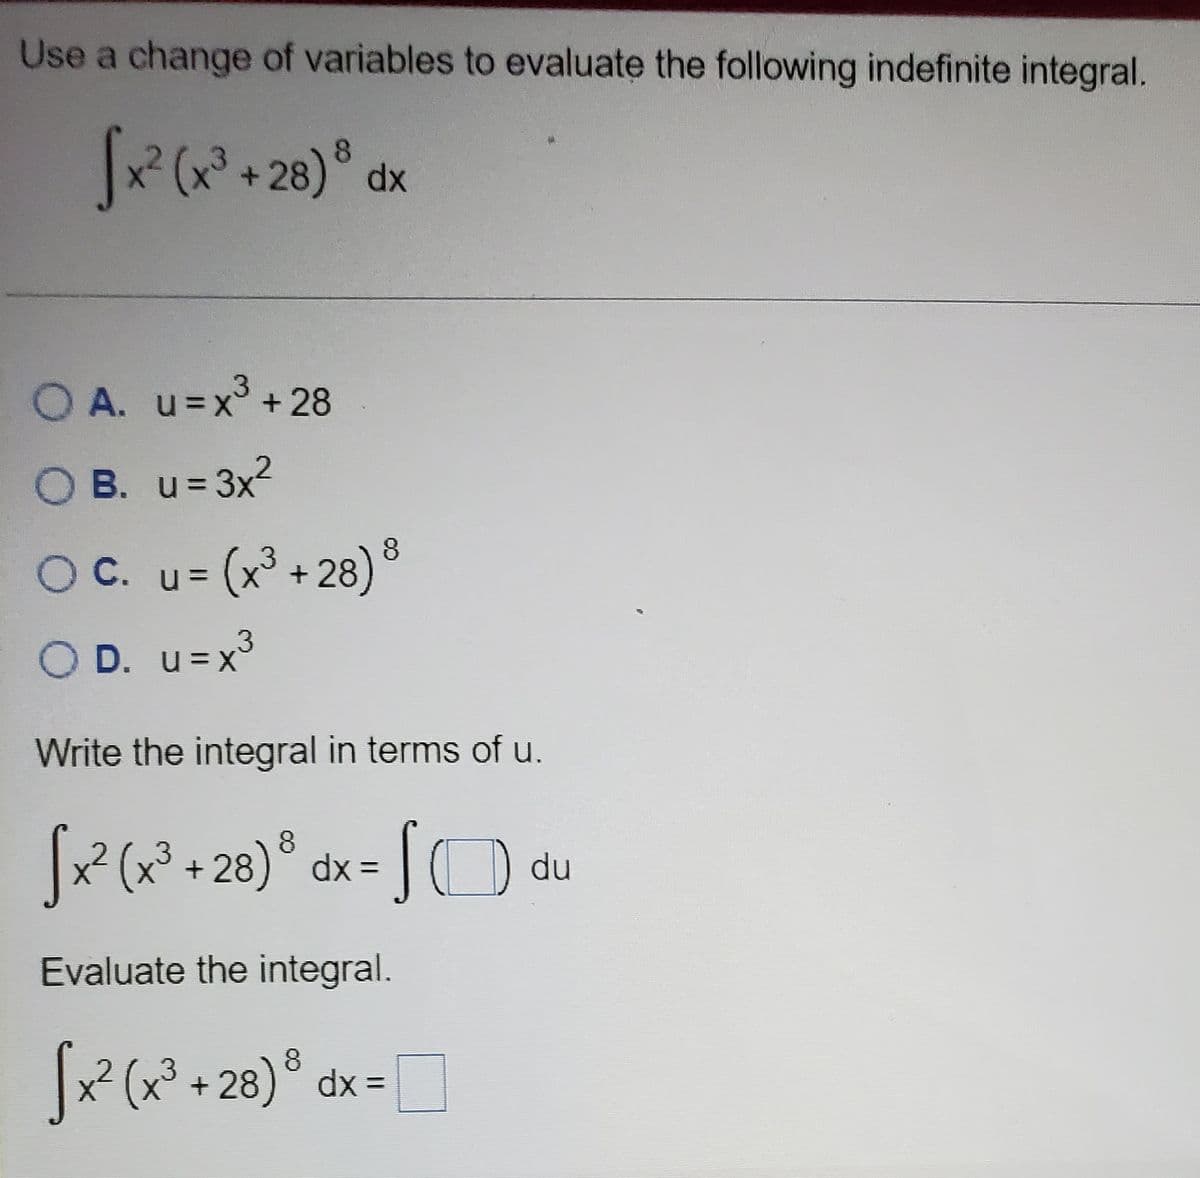 Use a change of variables to evaluate the following indefinite integral.
8.
O A. u=x + 28
O B. u= 3x2
OC. u= (x° + 28)°
OD. u=x³
u = x3
Write the integral in terms of u.
R(?+28)° dx=
du
Evaluate the integral.
(x* + 28)® dx=
